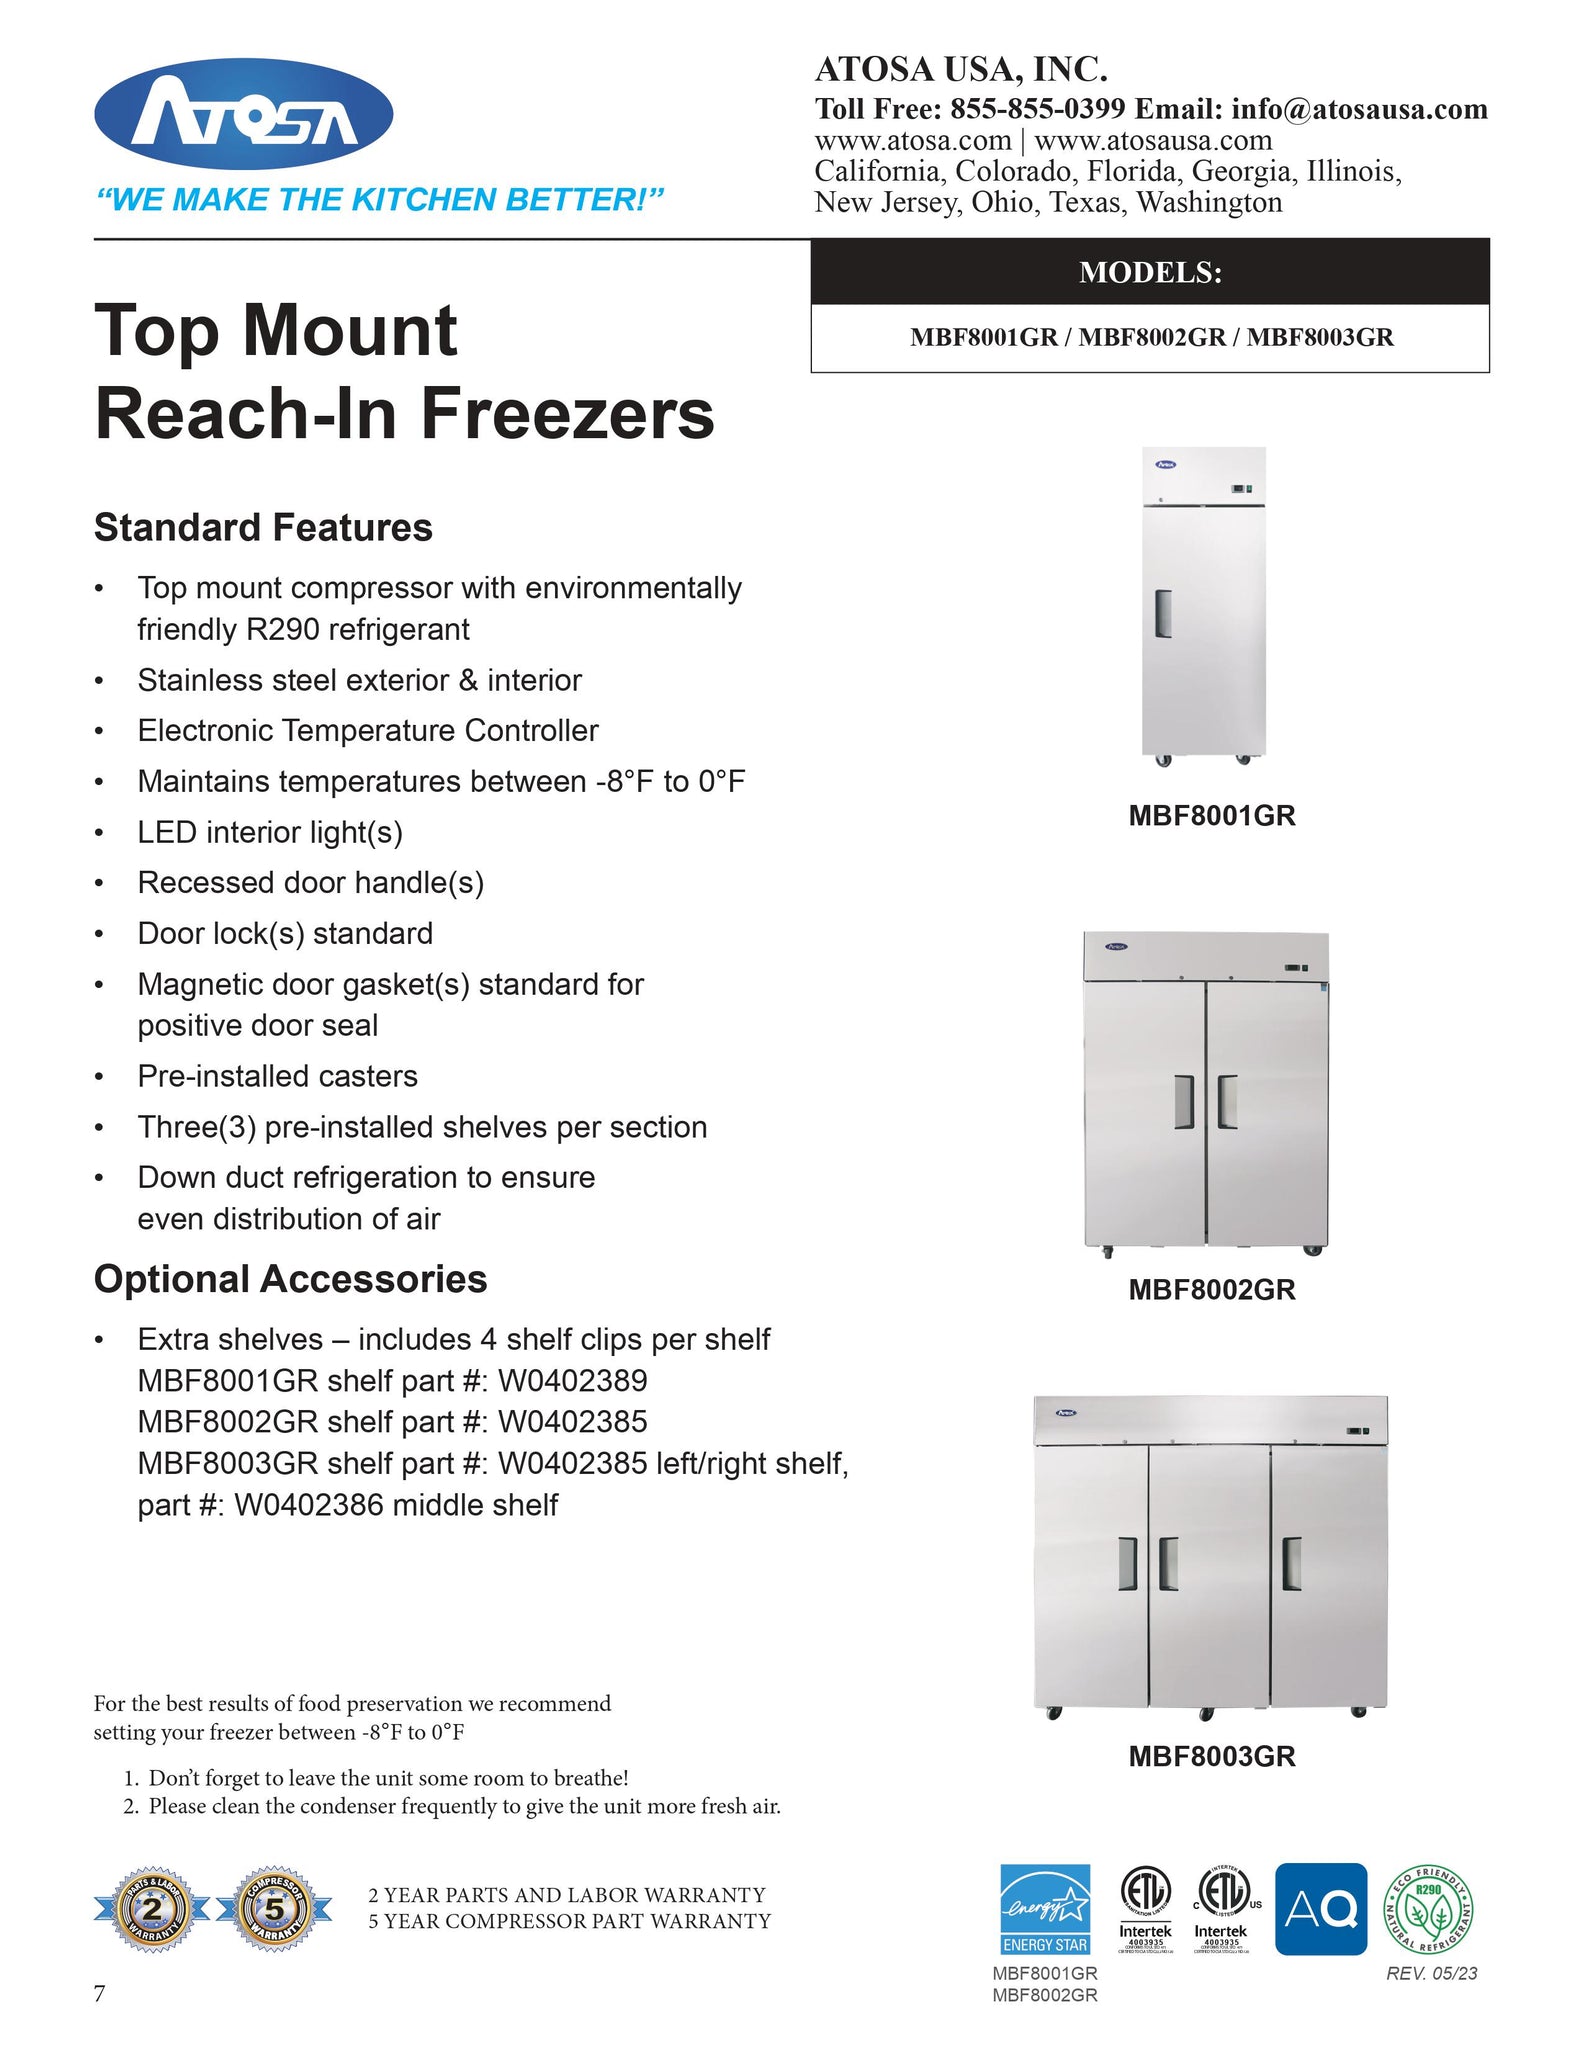 Atosa MBF8002GR 52" Two Section Solid Door Reach-In Freezer